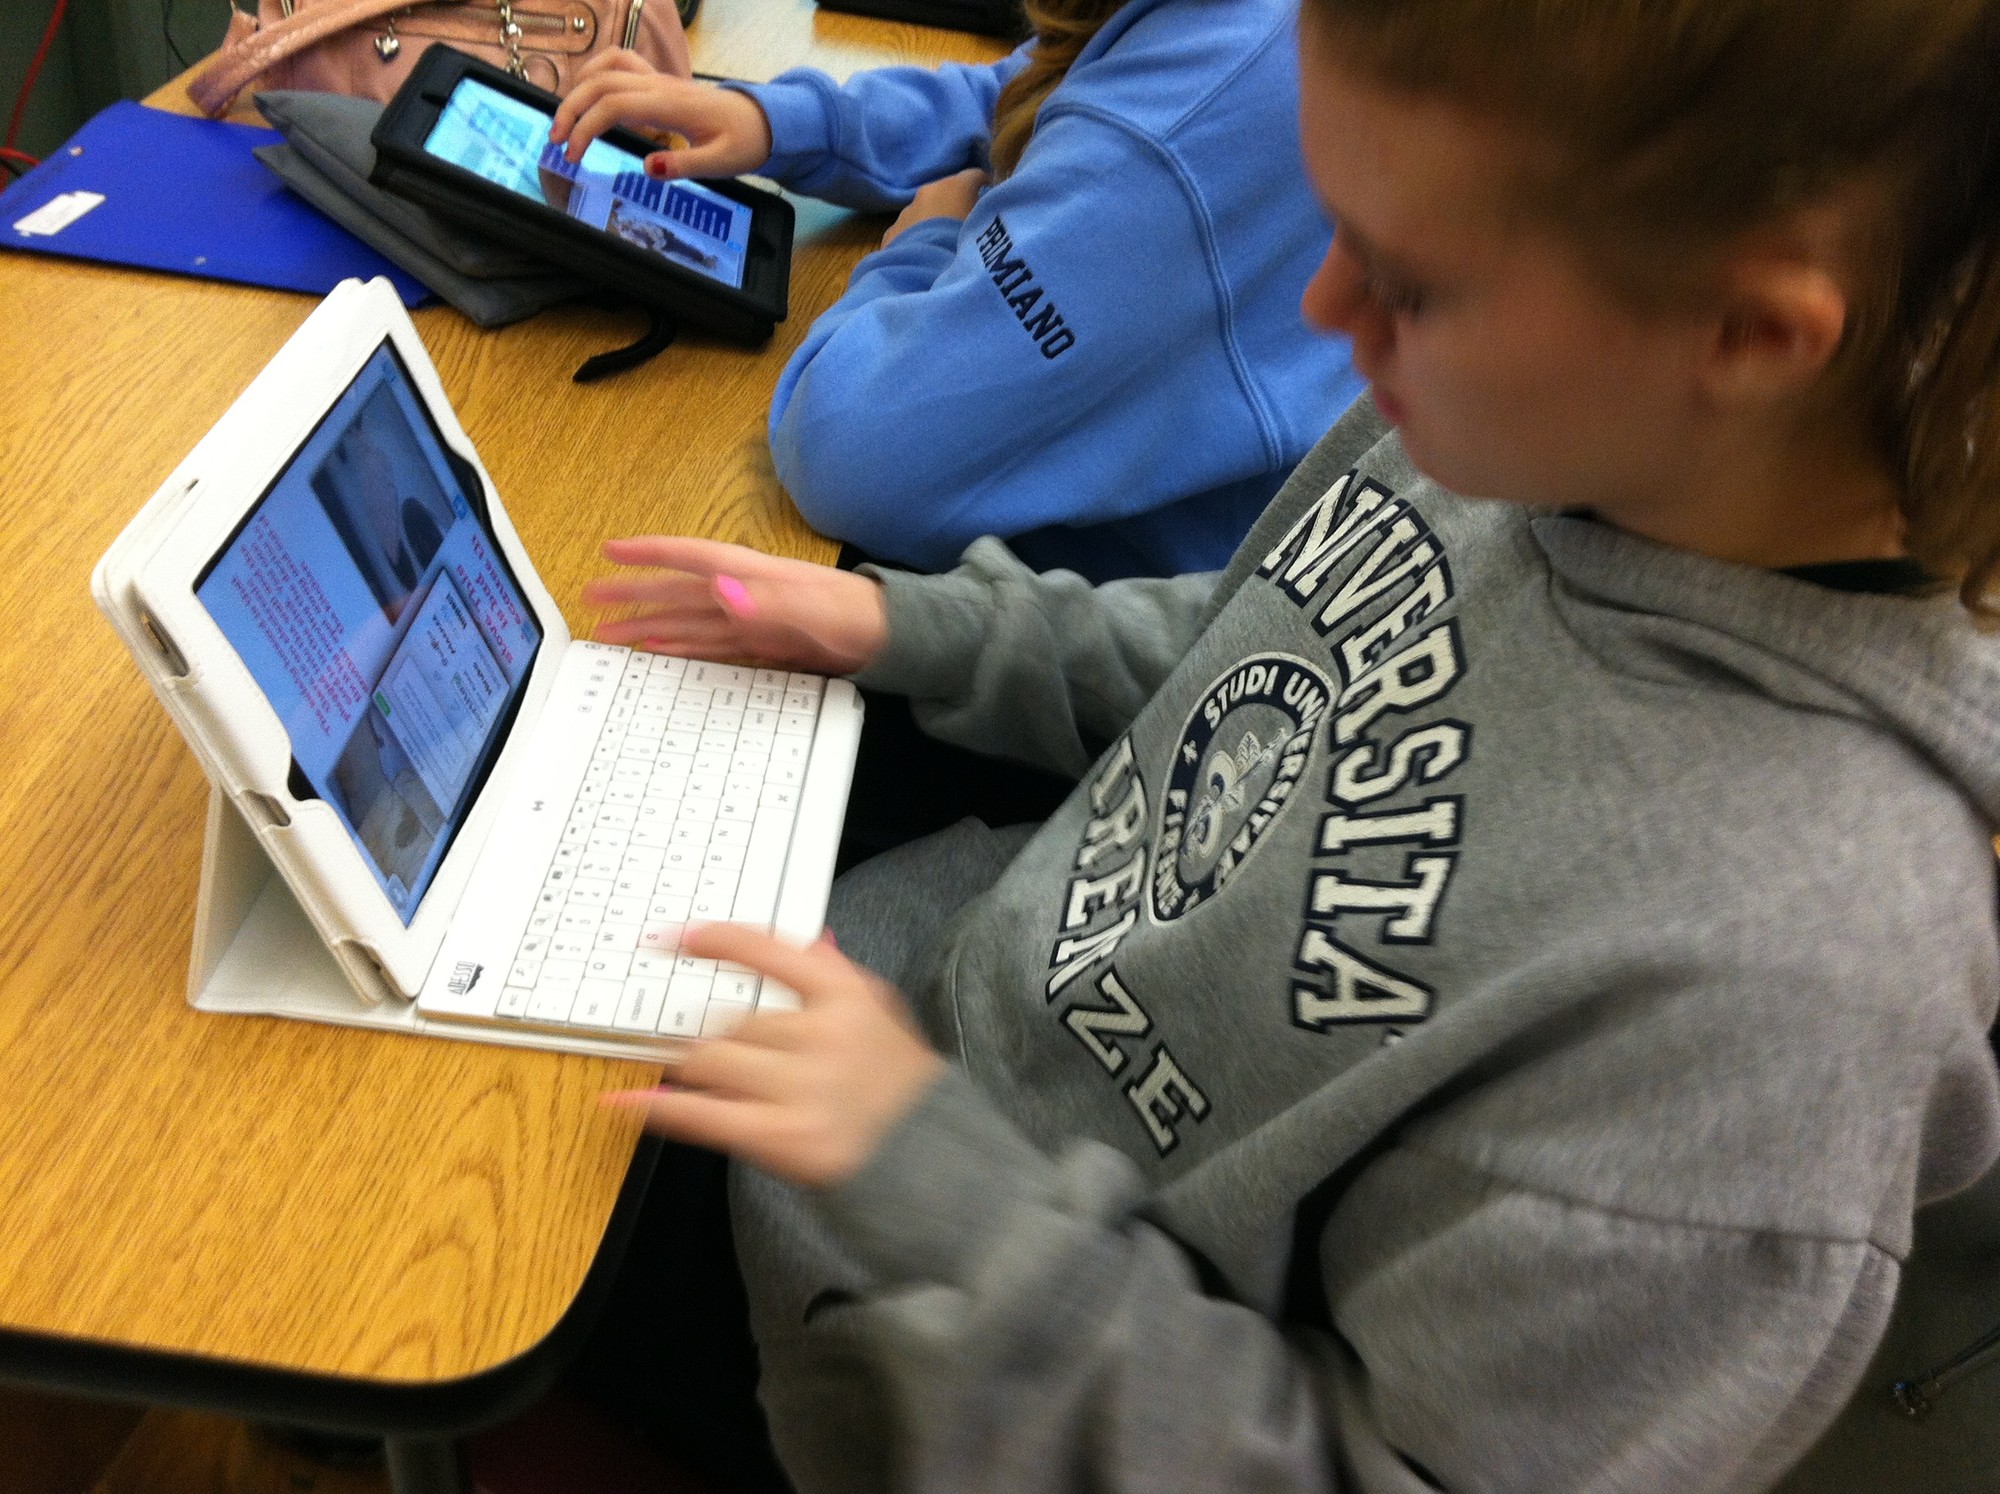 Oceanside Middle School students utilizes iPads during a lesson late last month.